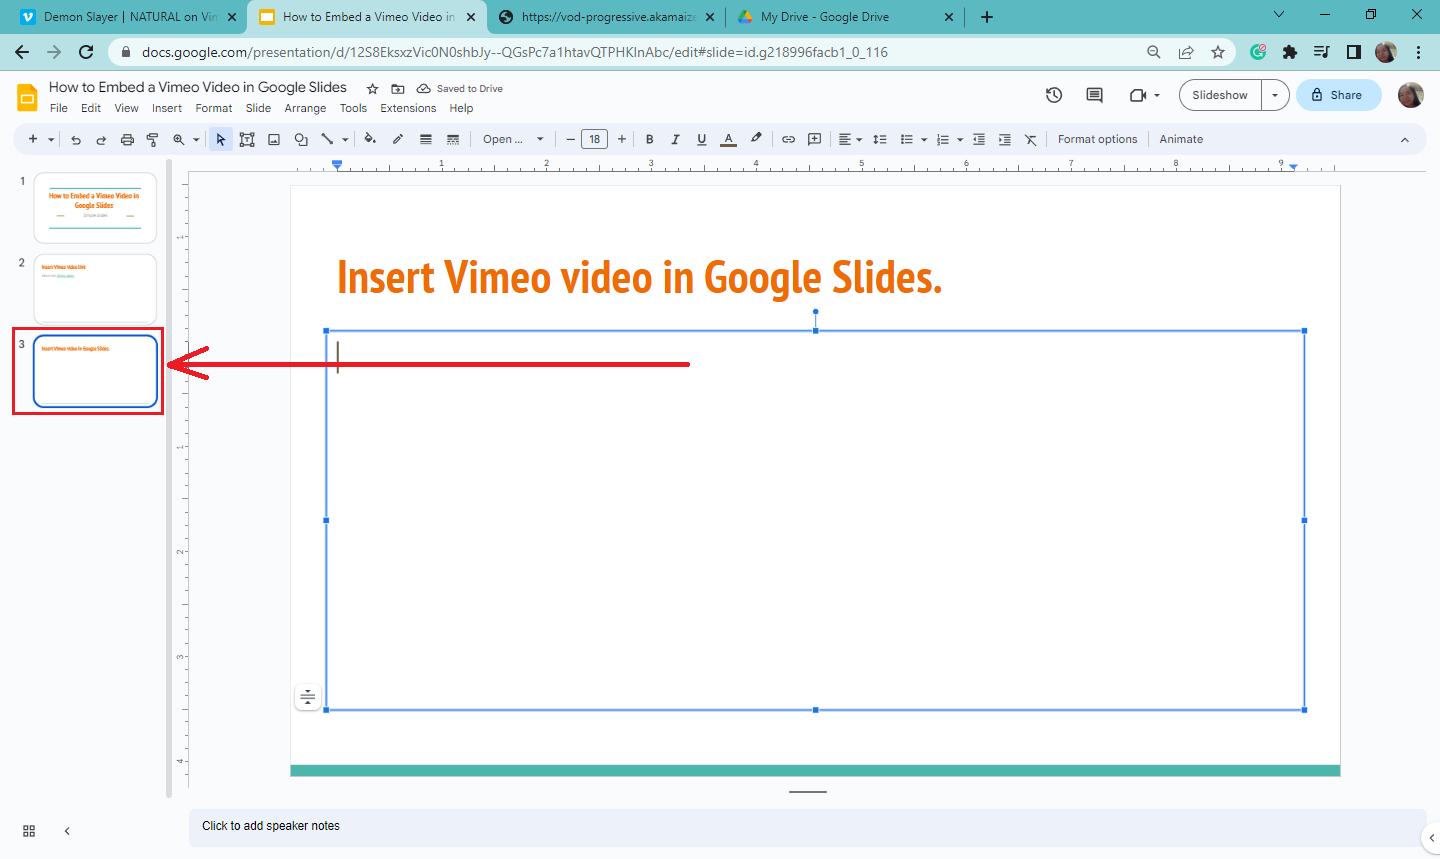 Select a slide where you want to embed video in Google Slides.